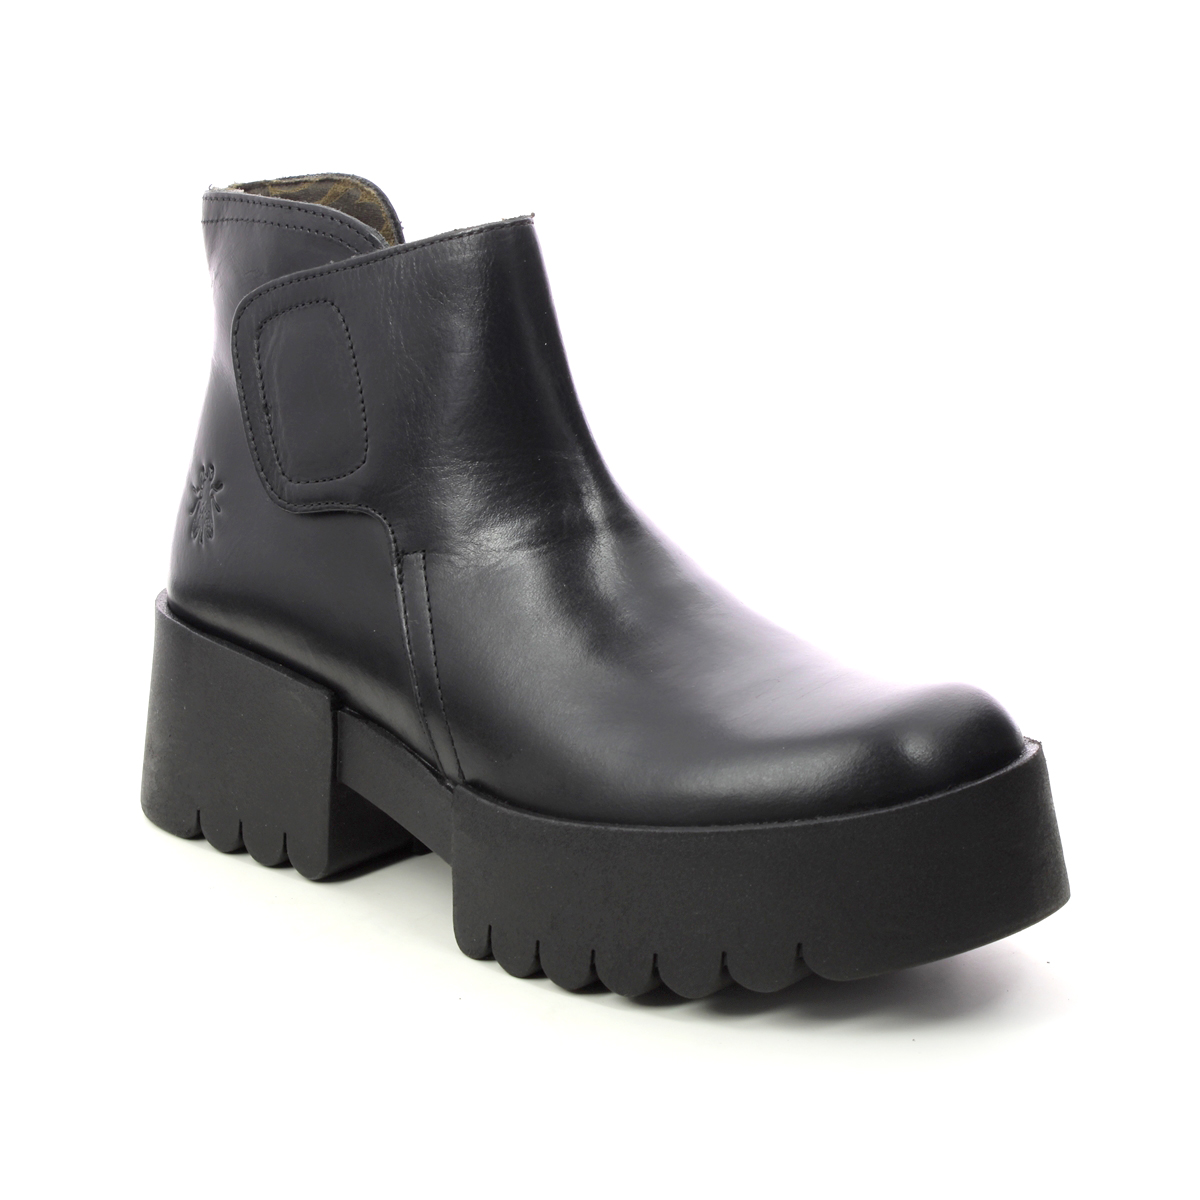 Fly London Endo   Esme Black Leather Womens Wedge Boots P145006 In Size 39 In Plain Black Leather